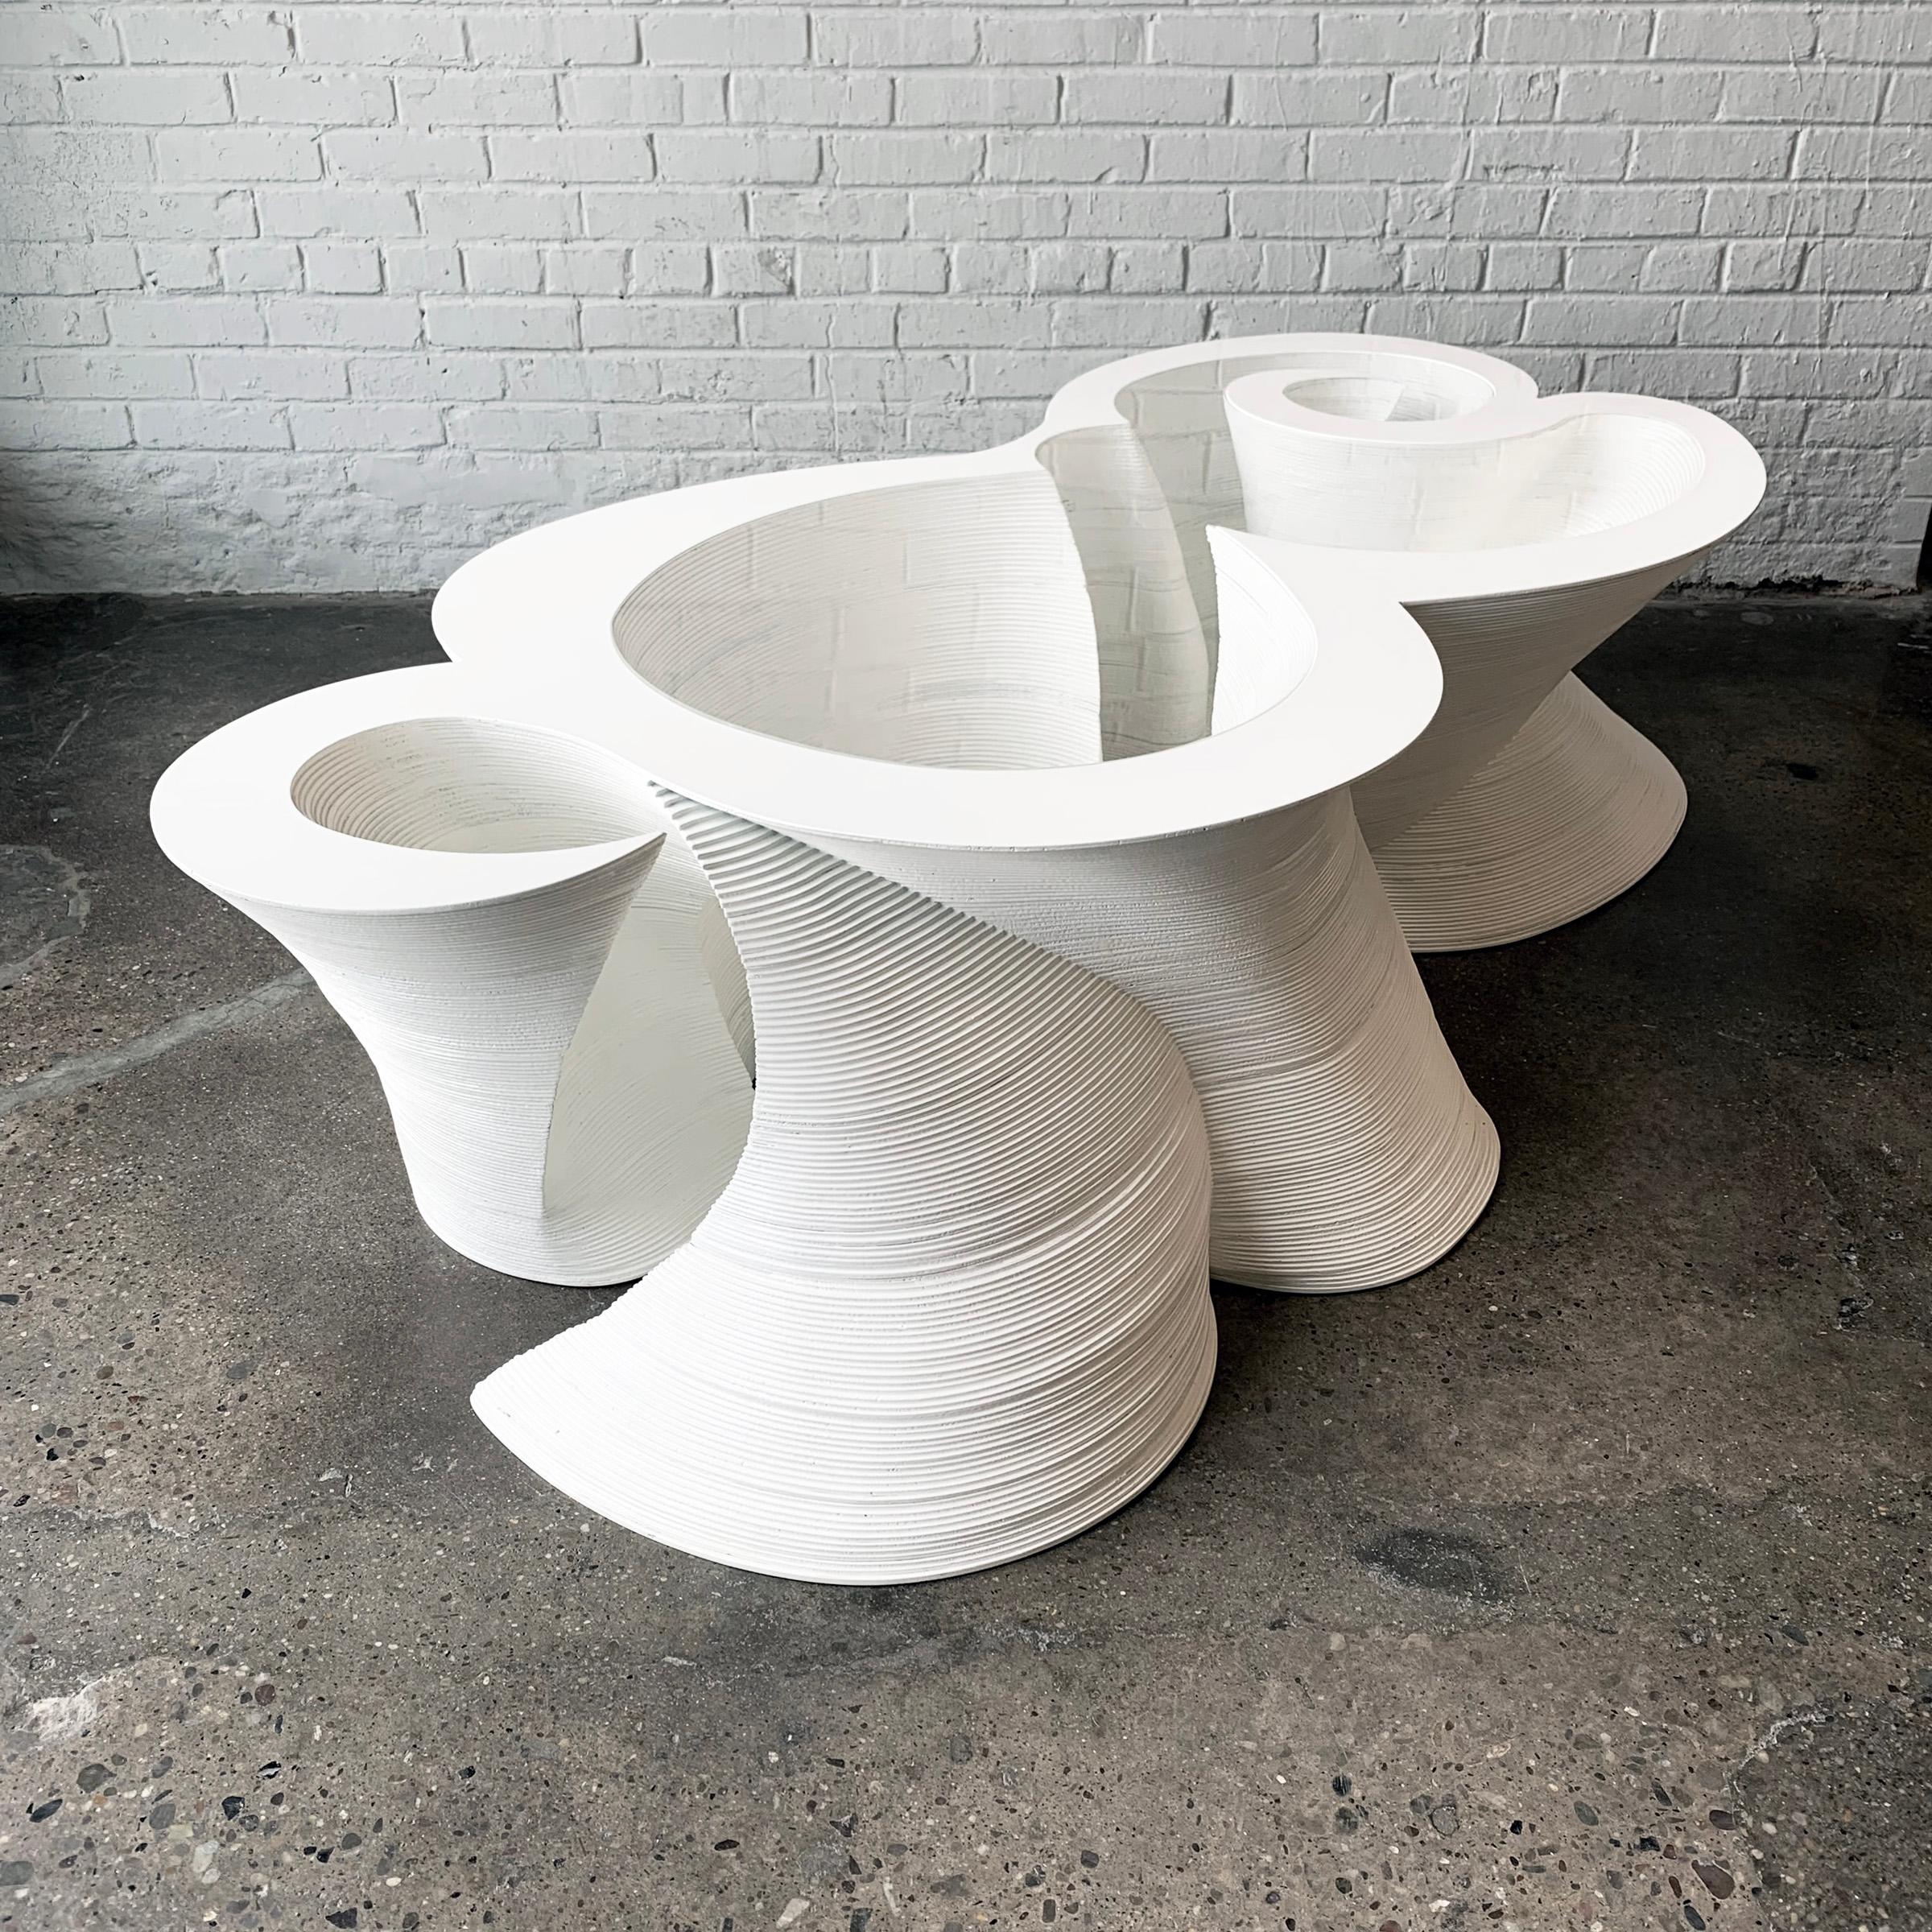 Modern White Coffee Table, Organic Modern Furniture, Custom Design Sculpture 

Immerse yourself in an undulating world of curves and caverns with this intricately designed and crafted organic modern coffee table that takes the idea of a sculpture